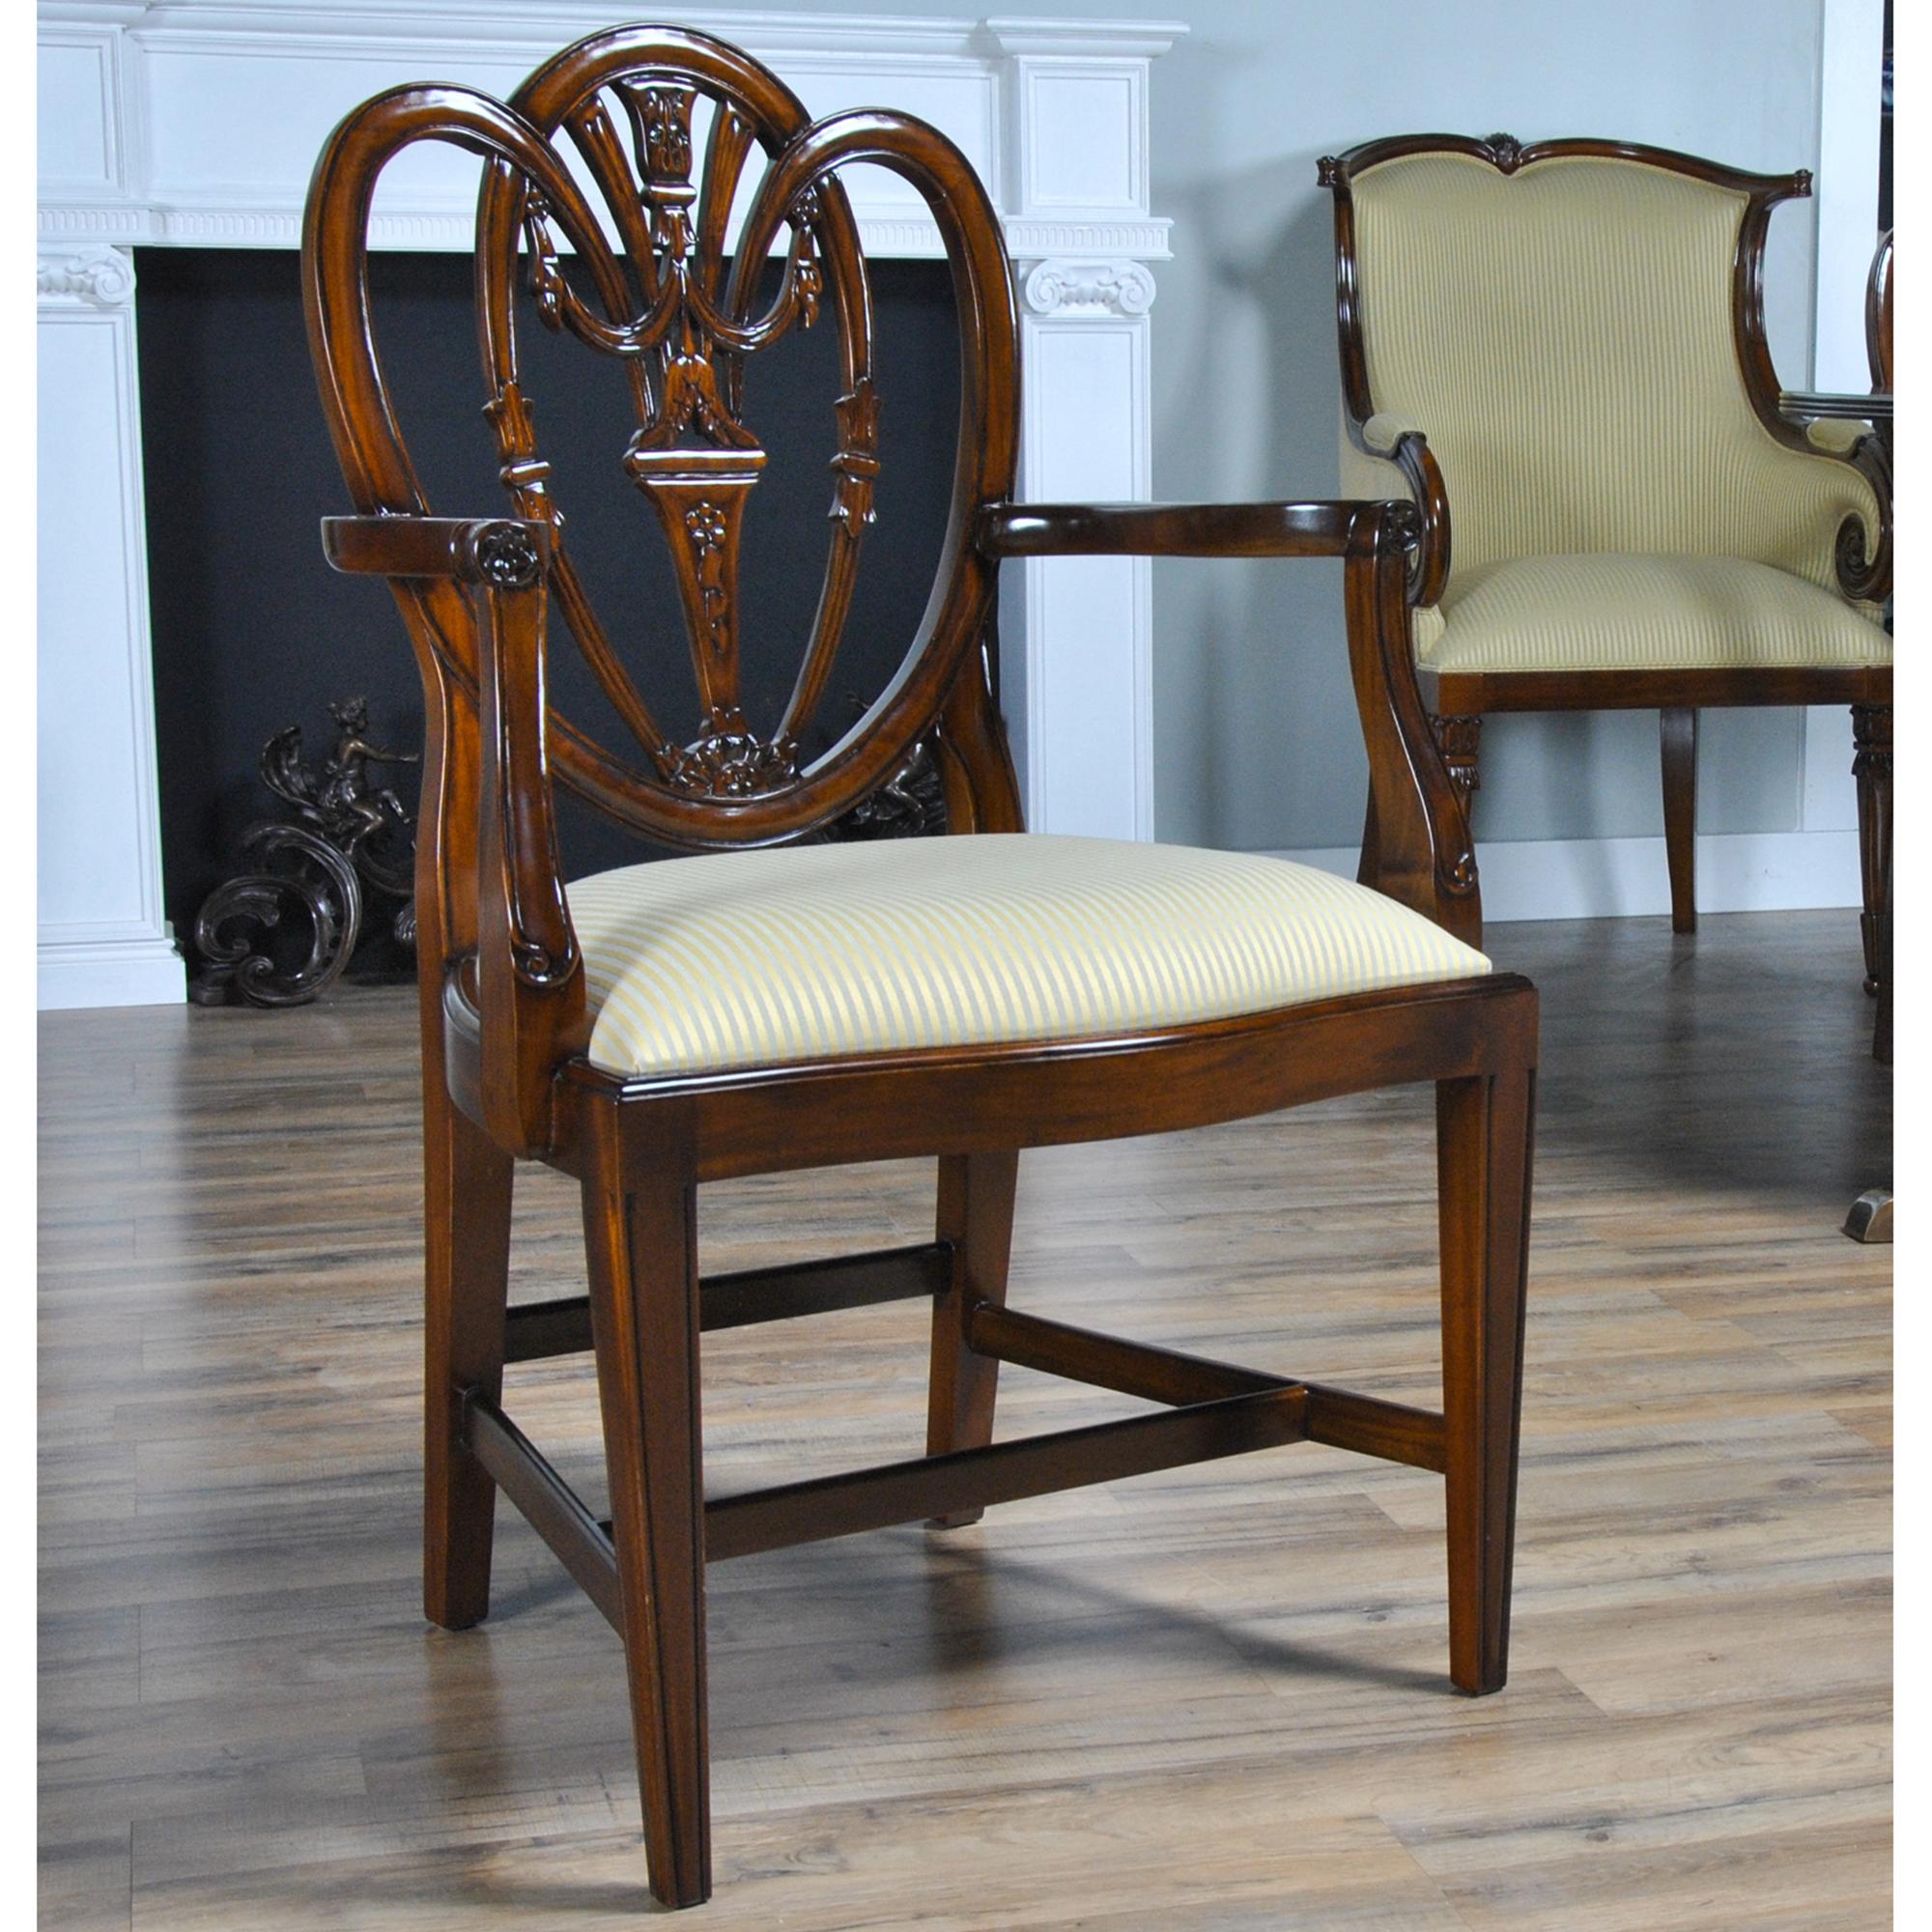 This Set of 10 Carved Shield Back Chairs are slightly larger and heavier than some of our other shield back chairs. The chairs in this set are as pretty as any chair we manufacture. The beautifully decorated back of the chair and the scrolled and